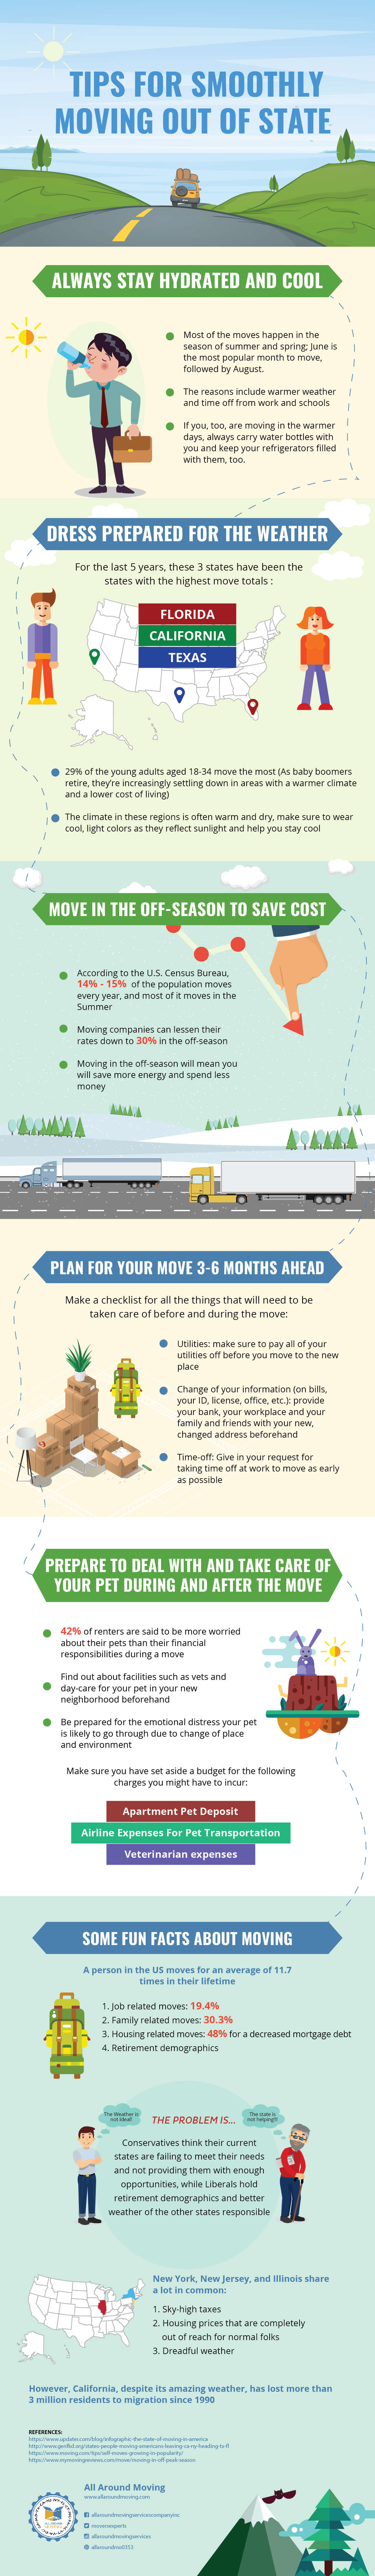 tip-for-smoothly-moving-out-of-state-infographic